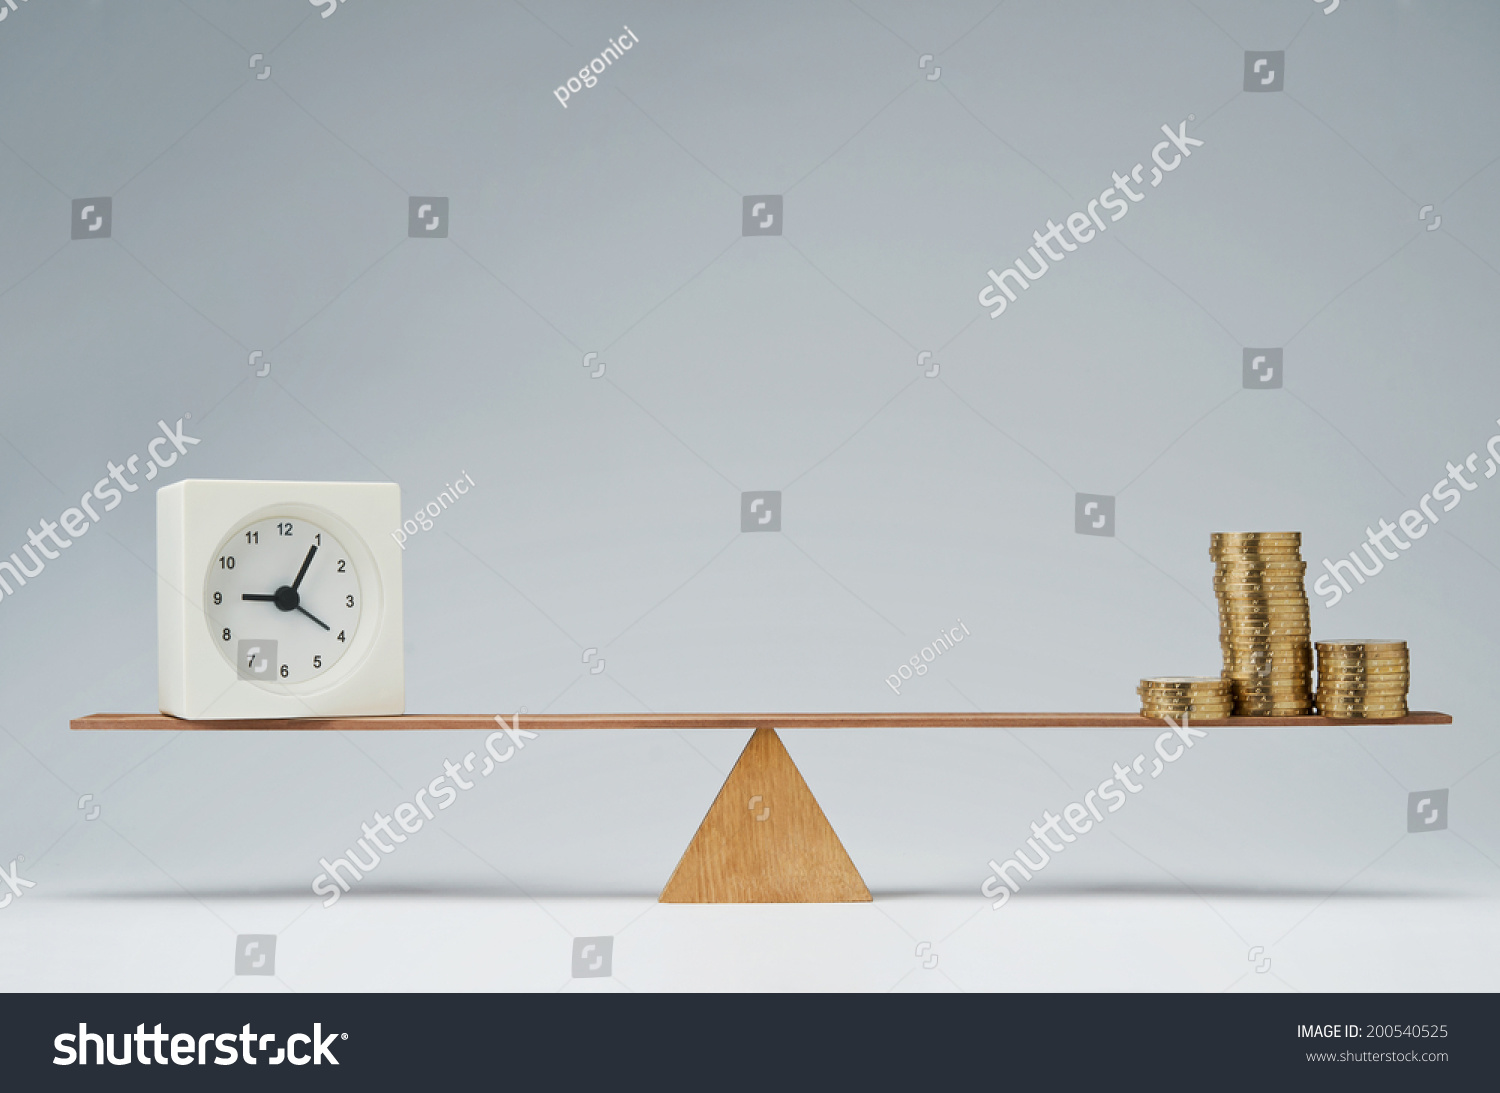 Clock and money coins stack balancing on a seesaw #200540525